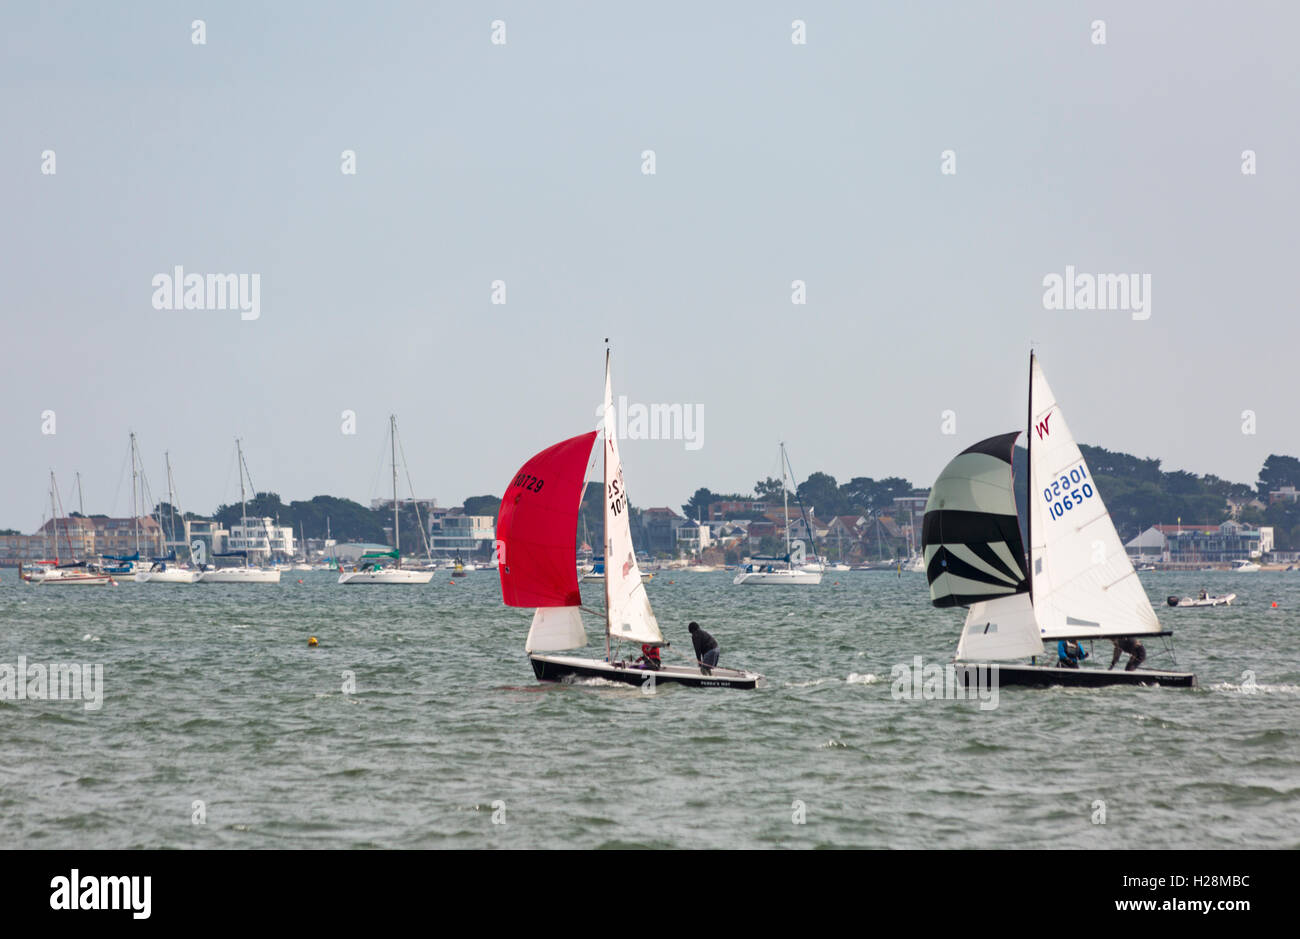 Sailing in Poole Harbour at Poole, Dorset UK in September Stock Photo